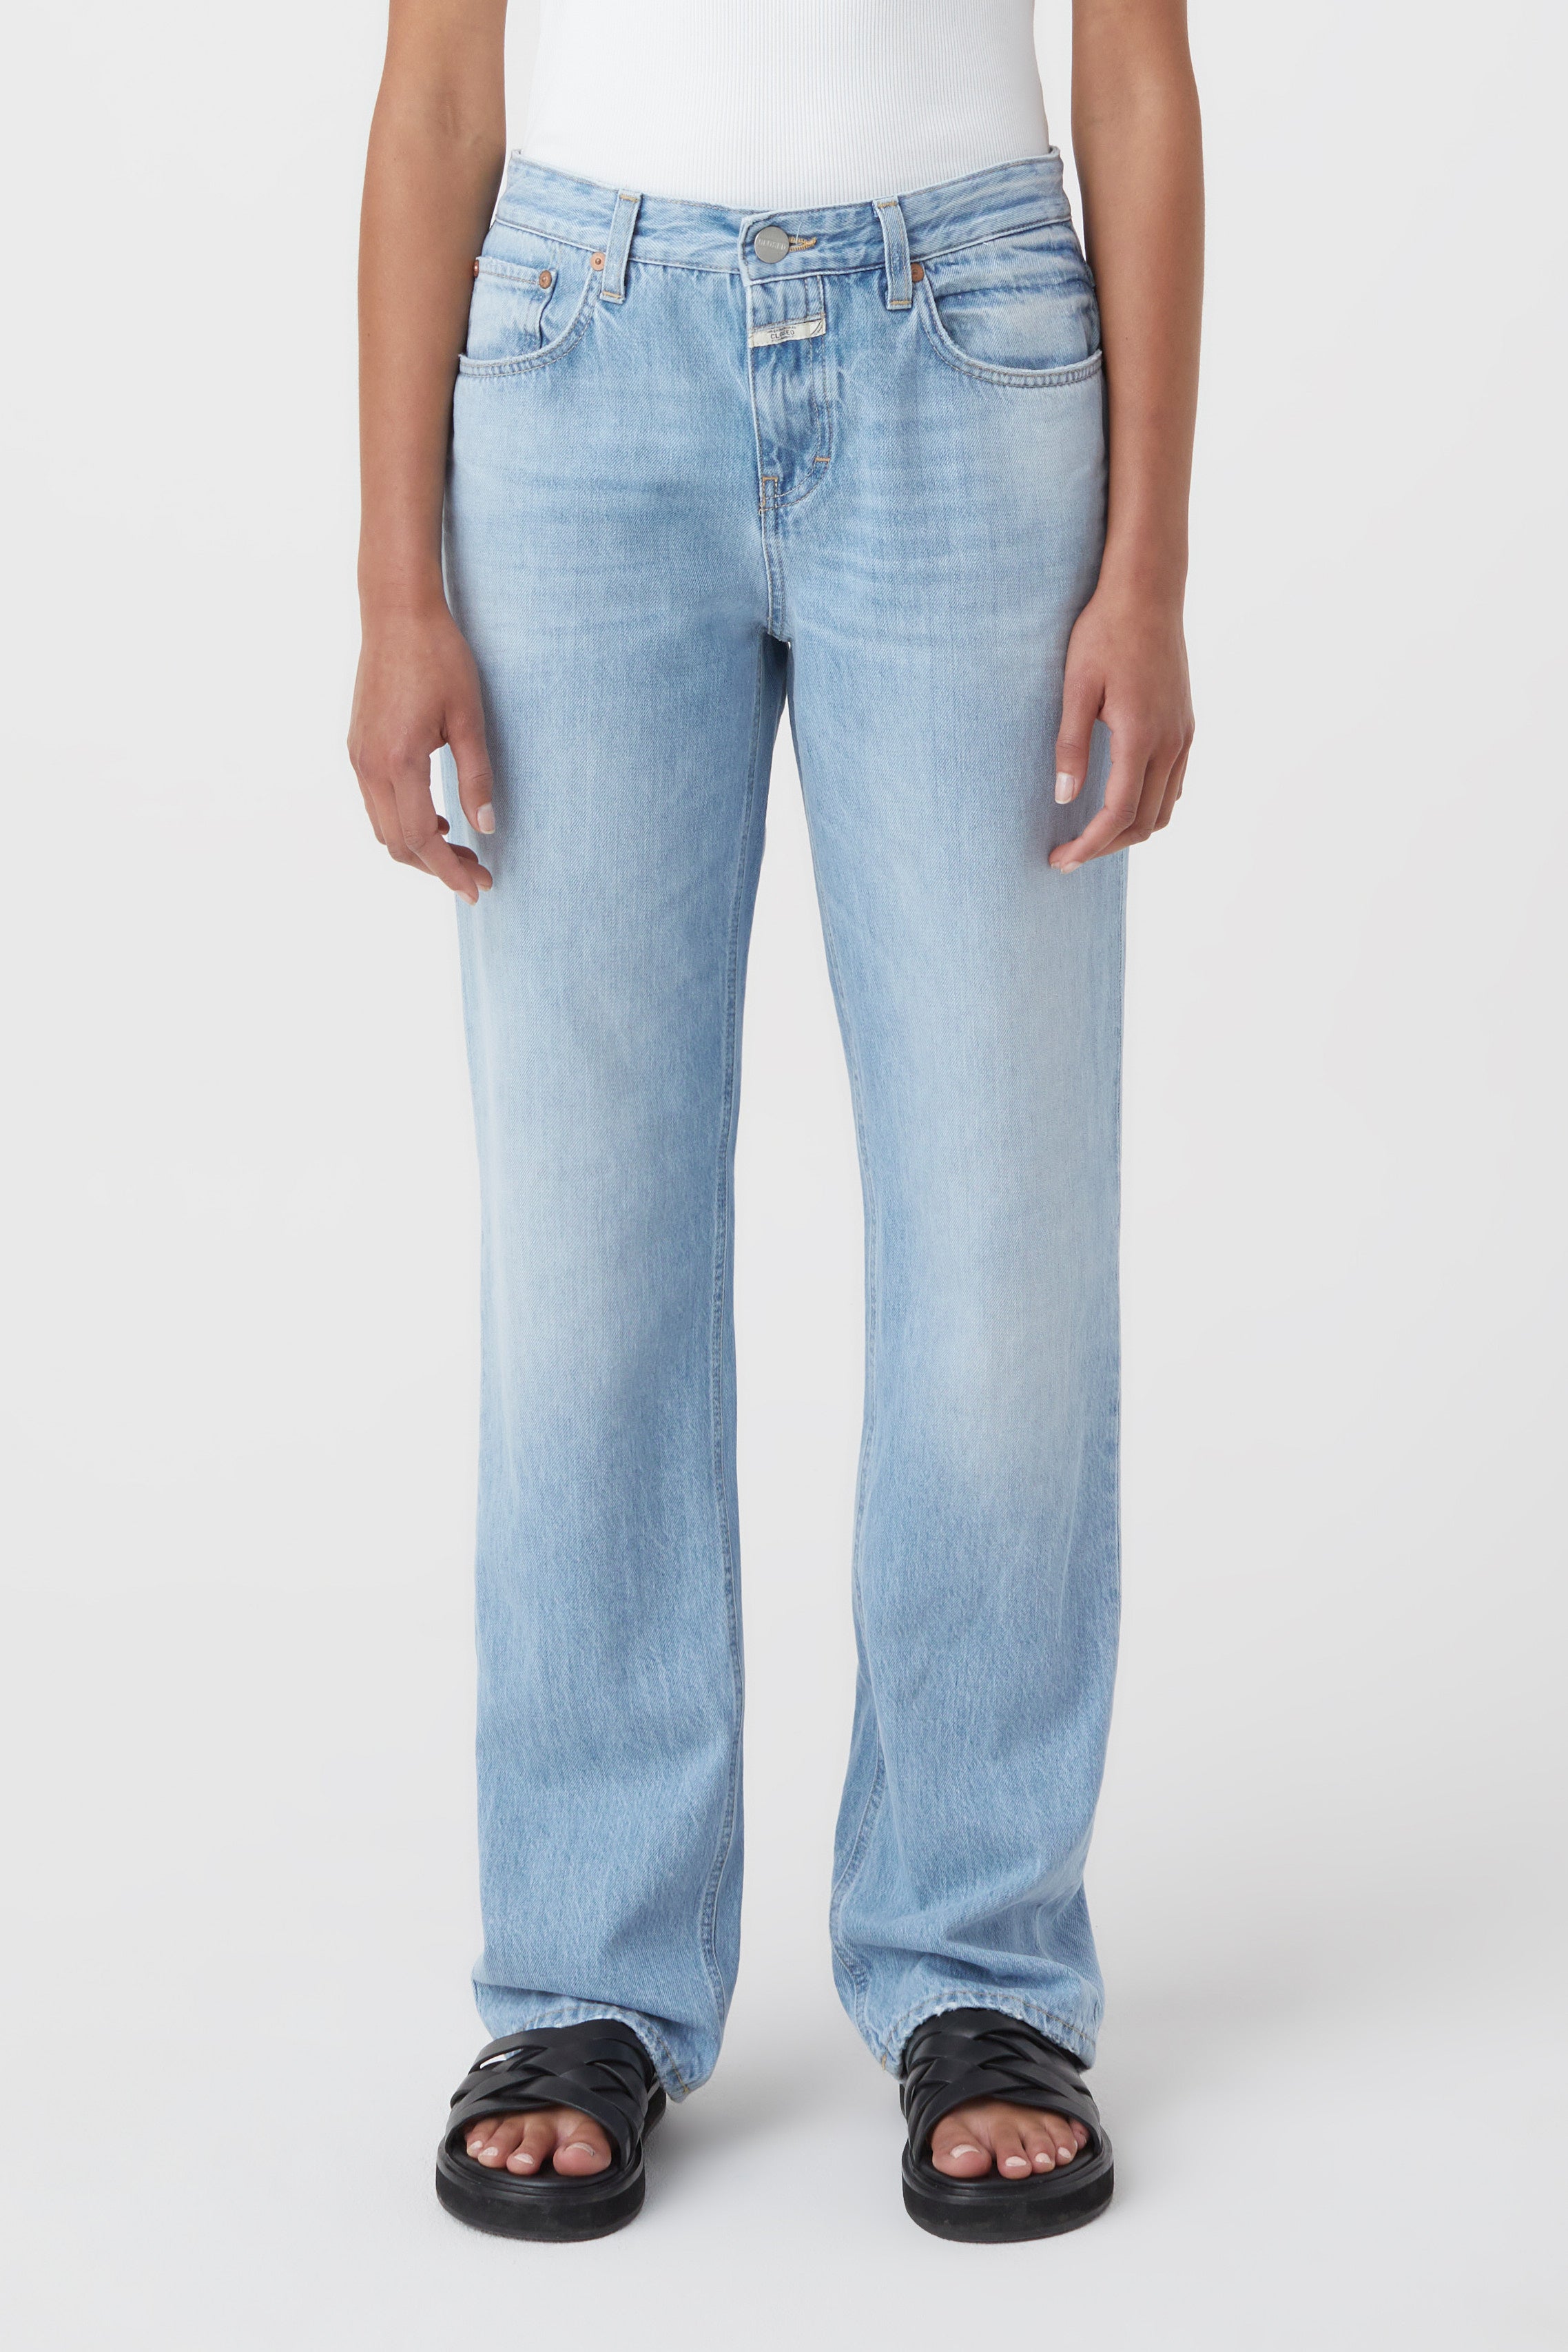 CLOSED-OUTLET-SALE-Jeans-Style-Name-BRISTON-Jeans-ARCHIVE-COLLECTION_363bbfae-75e2-467c-8b8f-23602672556c.jpg